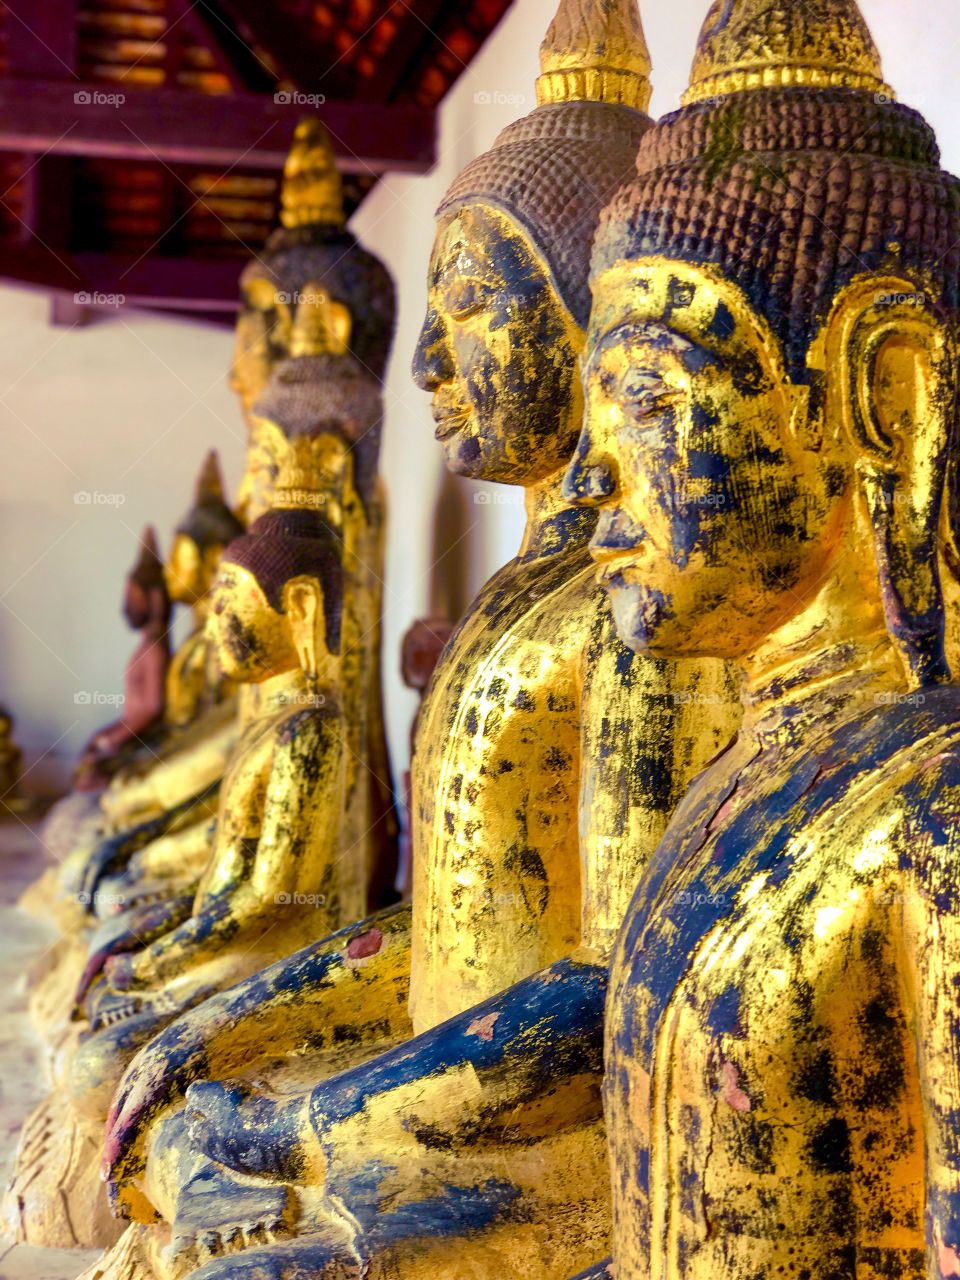 Row of Buddha images in temple